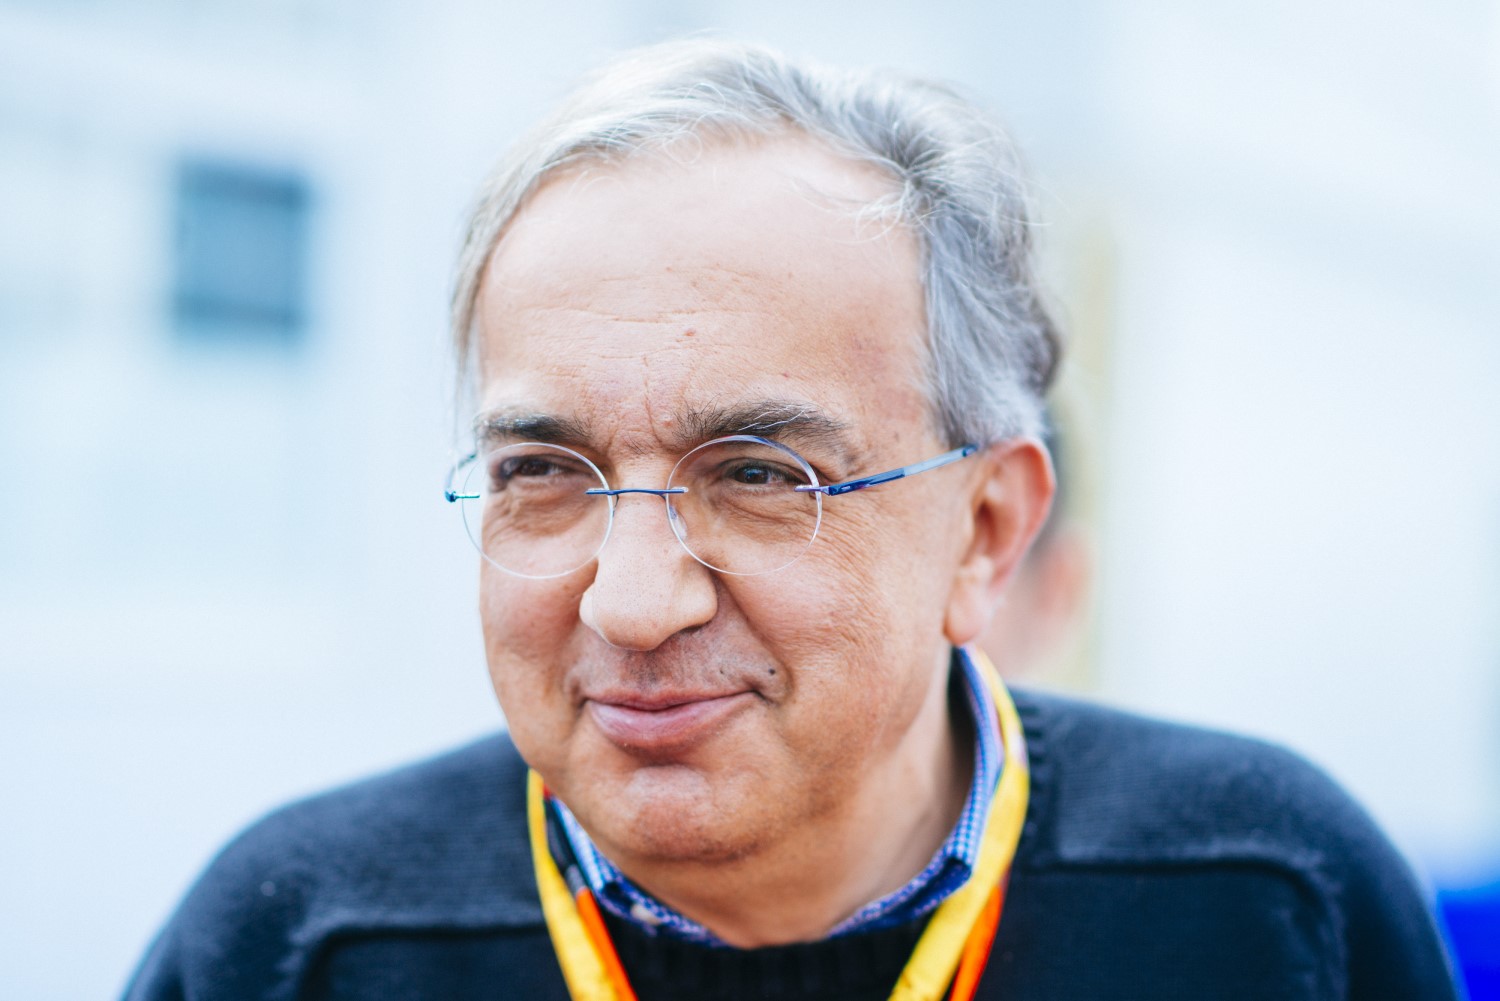 Sergio Marchionne laughs at rumor. Ferrari is now a public company so he cannot buy it